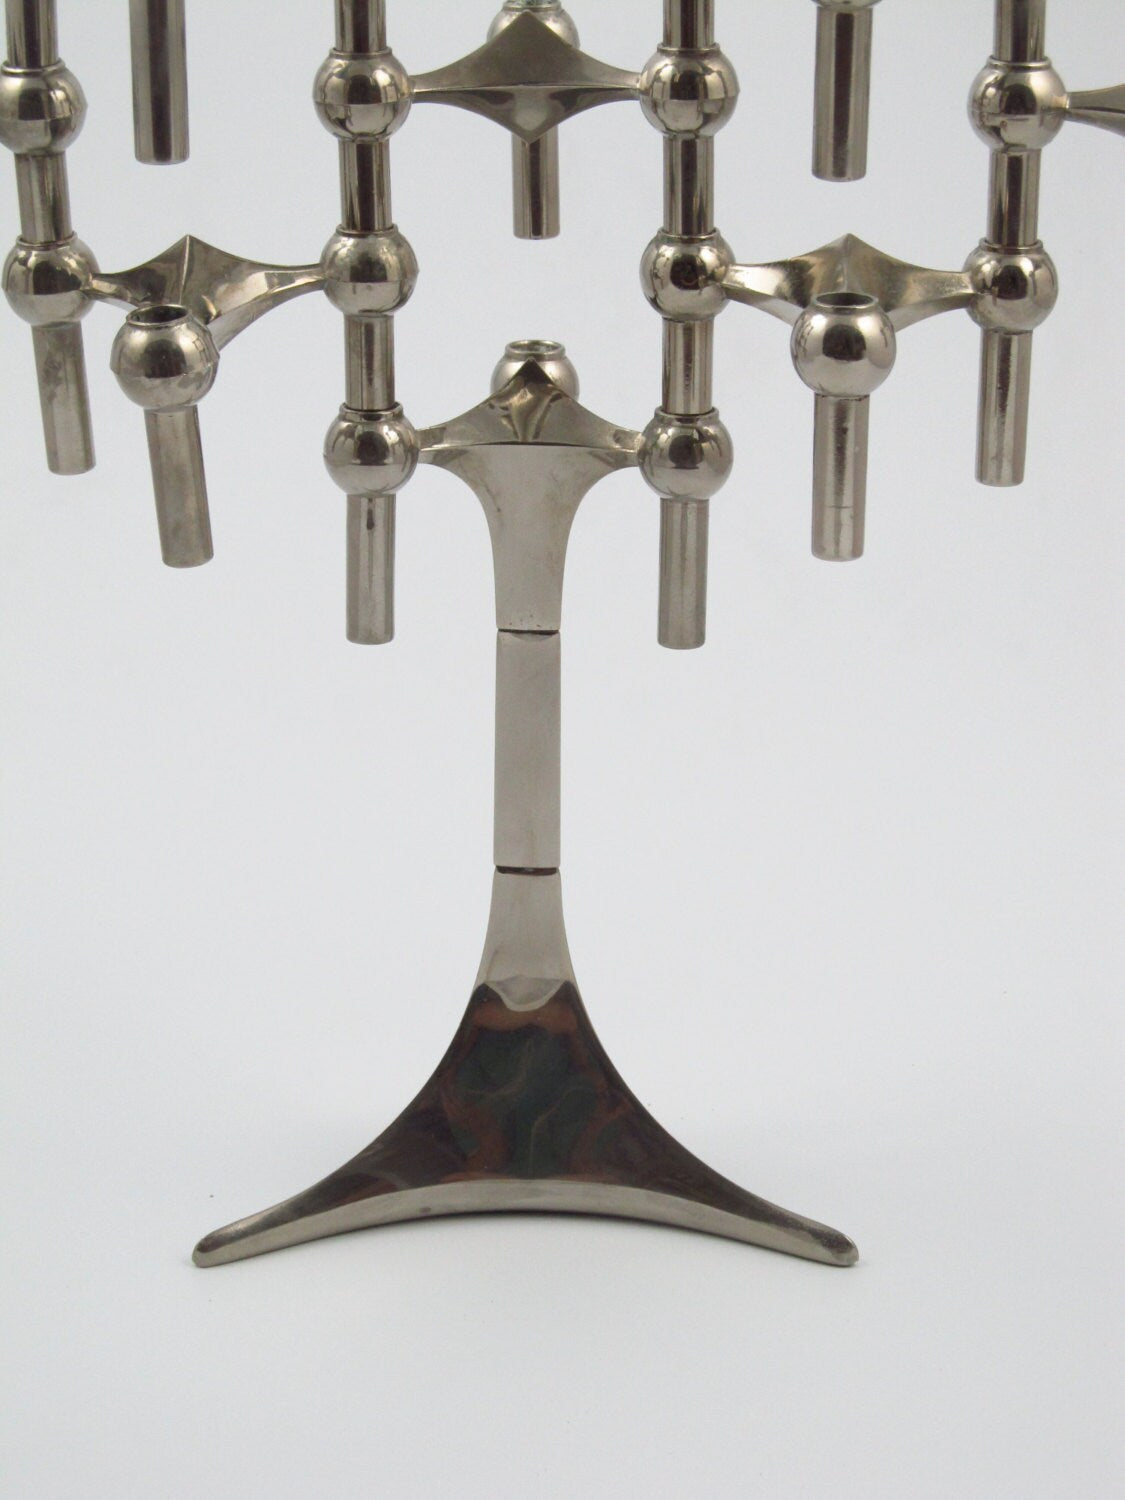 Set of 8 & Base for Candle holders S22 designed by Ceasar Stoffi and Fritz Nagel and manufactured by BMF